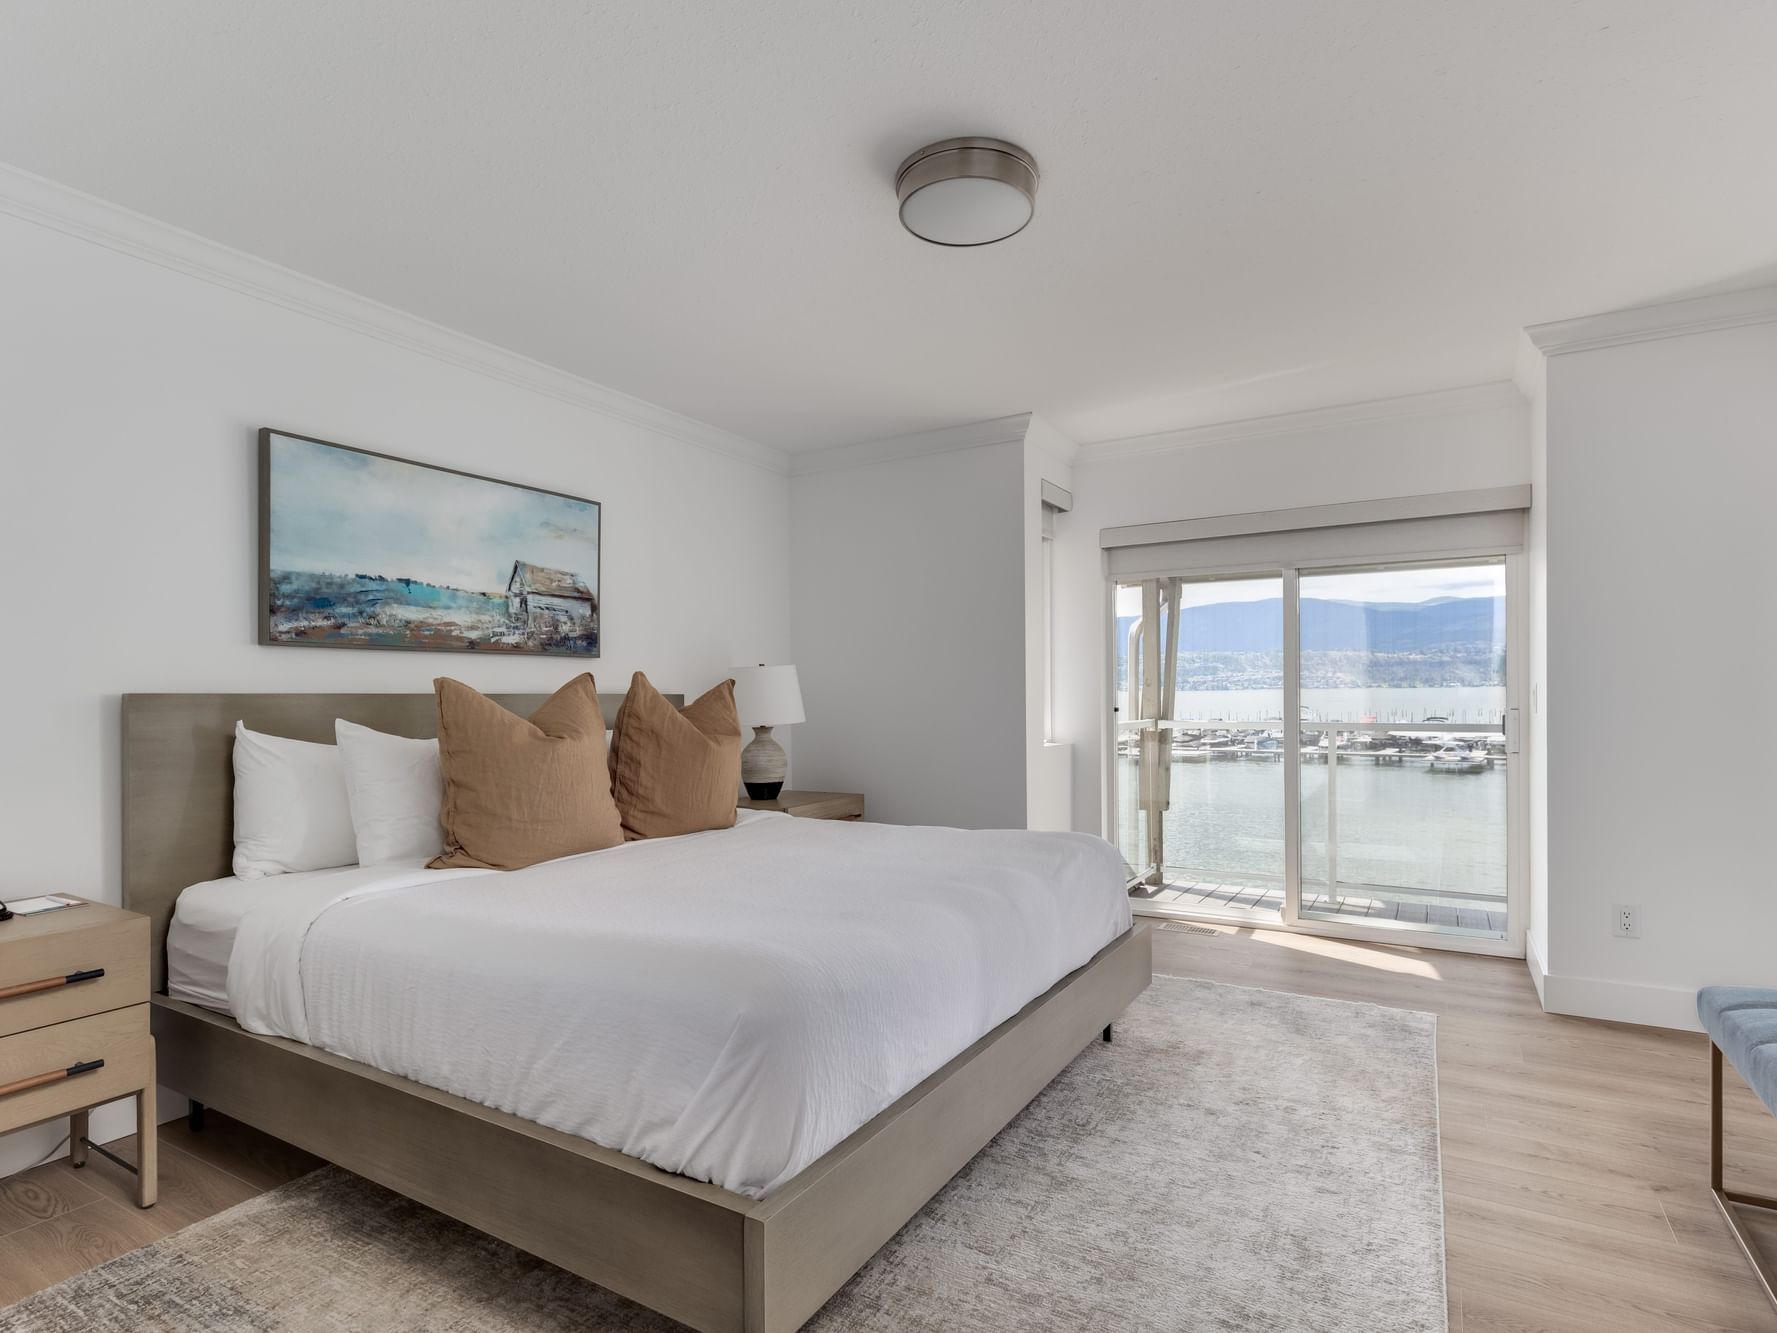 Cozy bed with wooden floors in Three Bedroom Luxury Lakeside Villa at Manteo Resort Waterfront